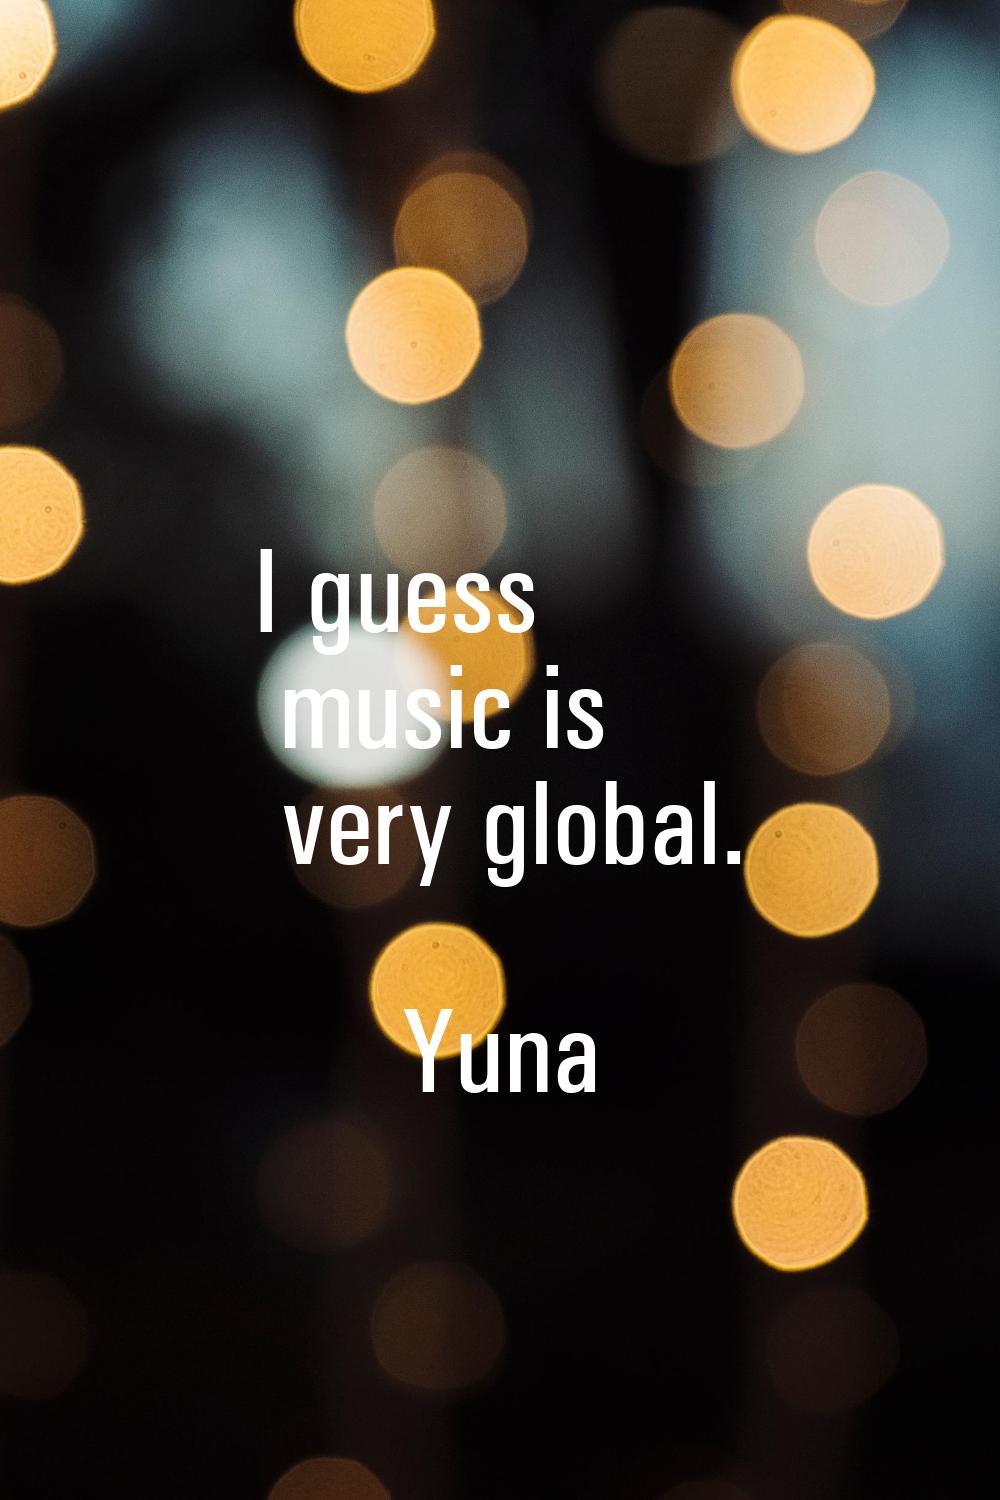 I guess music is very global.